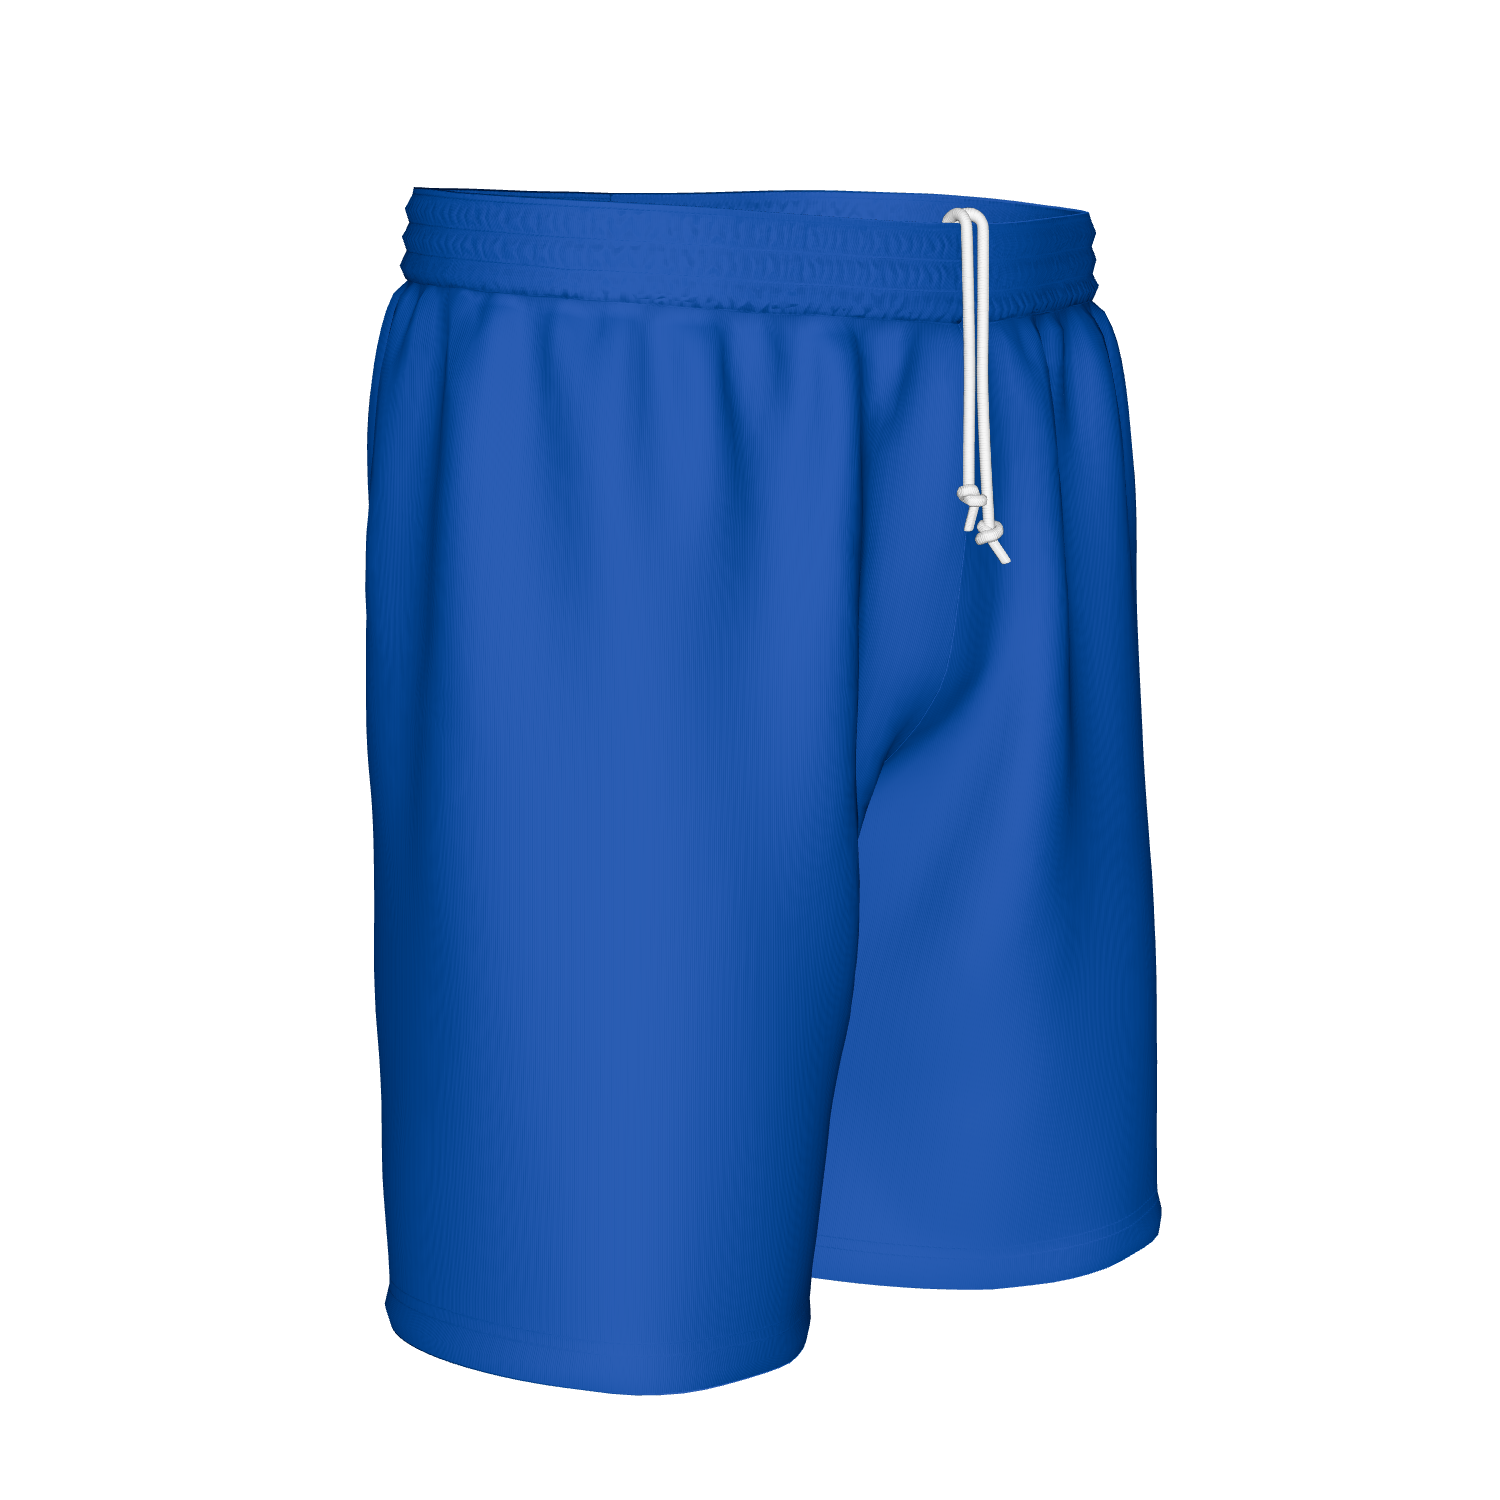 Diver men's volleyball shorts 2.0 | SPIZED0000 | 783055. SPIZED0000